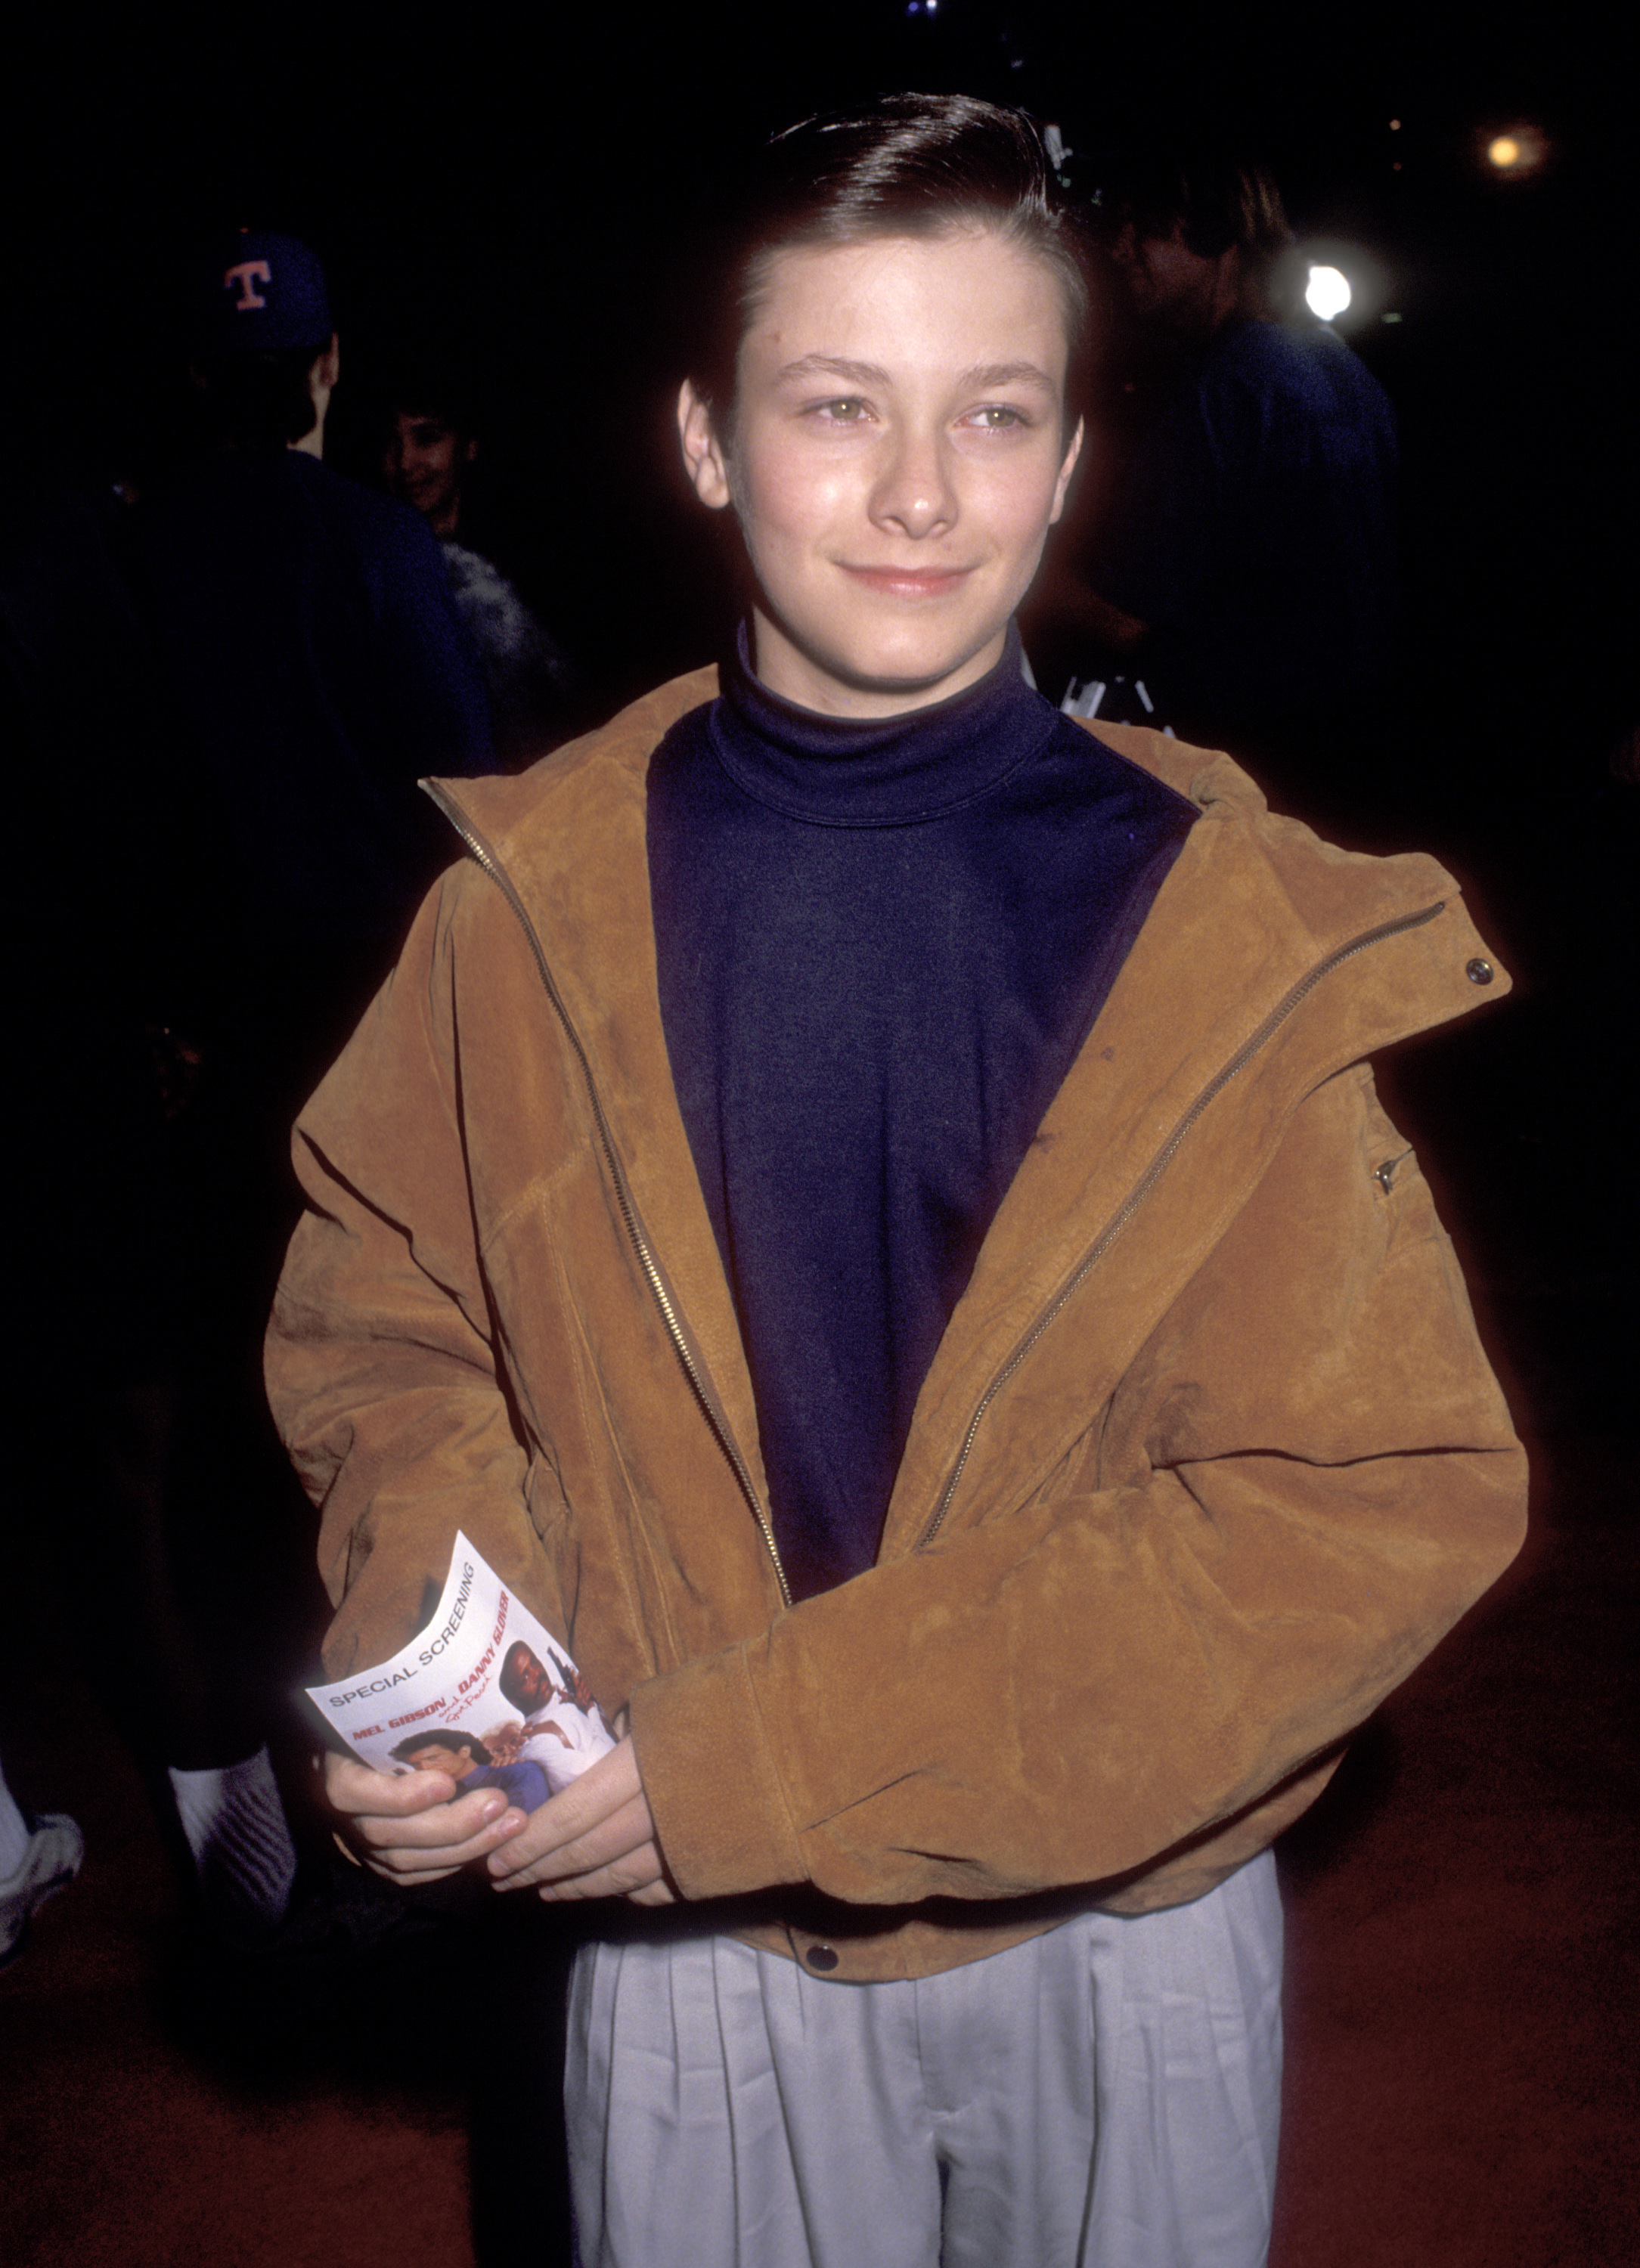 Edward Furlong at the "Lethal Weapon 3" premiere on May 11, 1992, in Westwood, California | Source: Getty Images